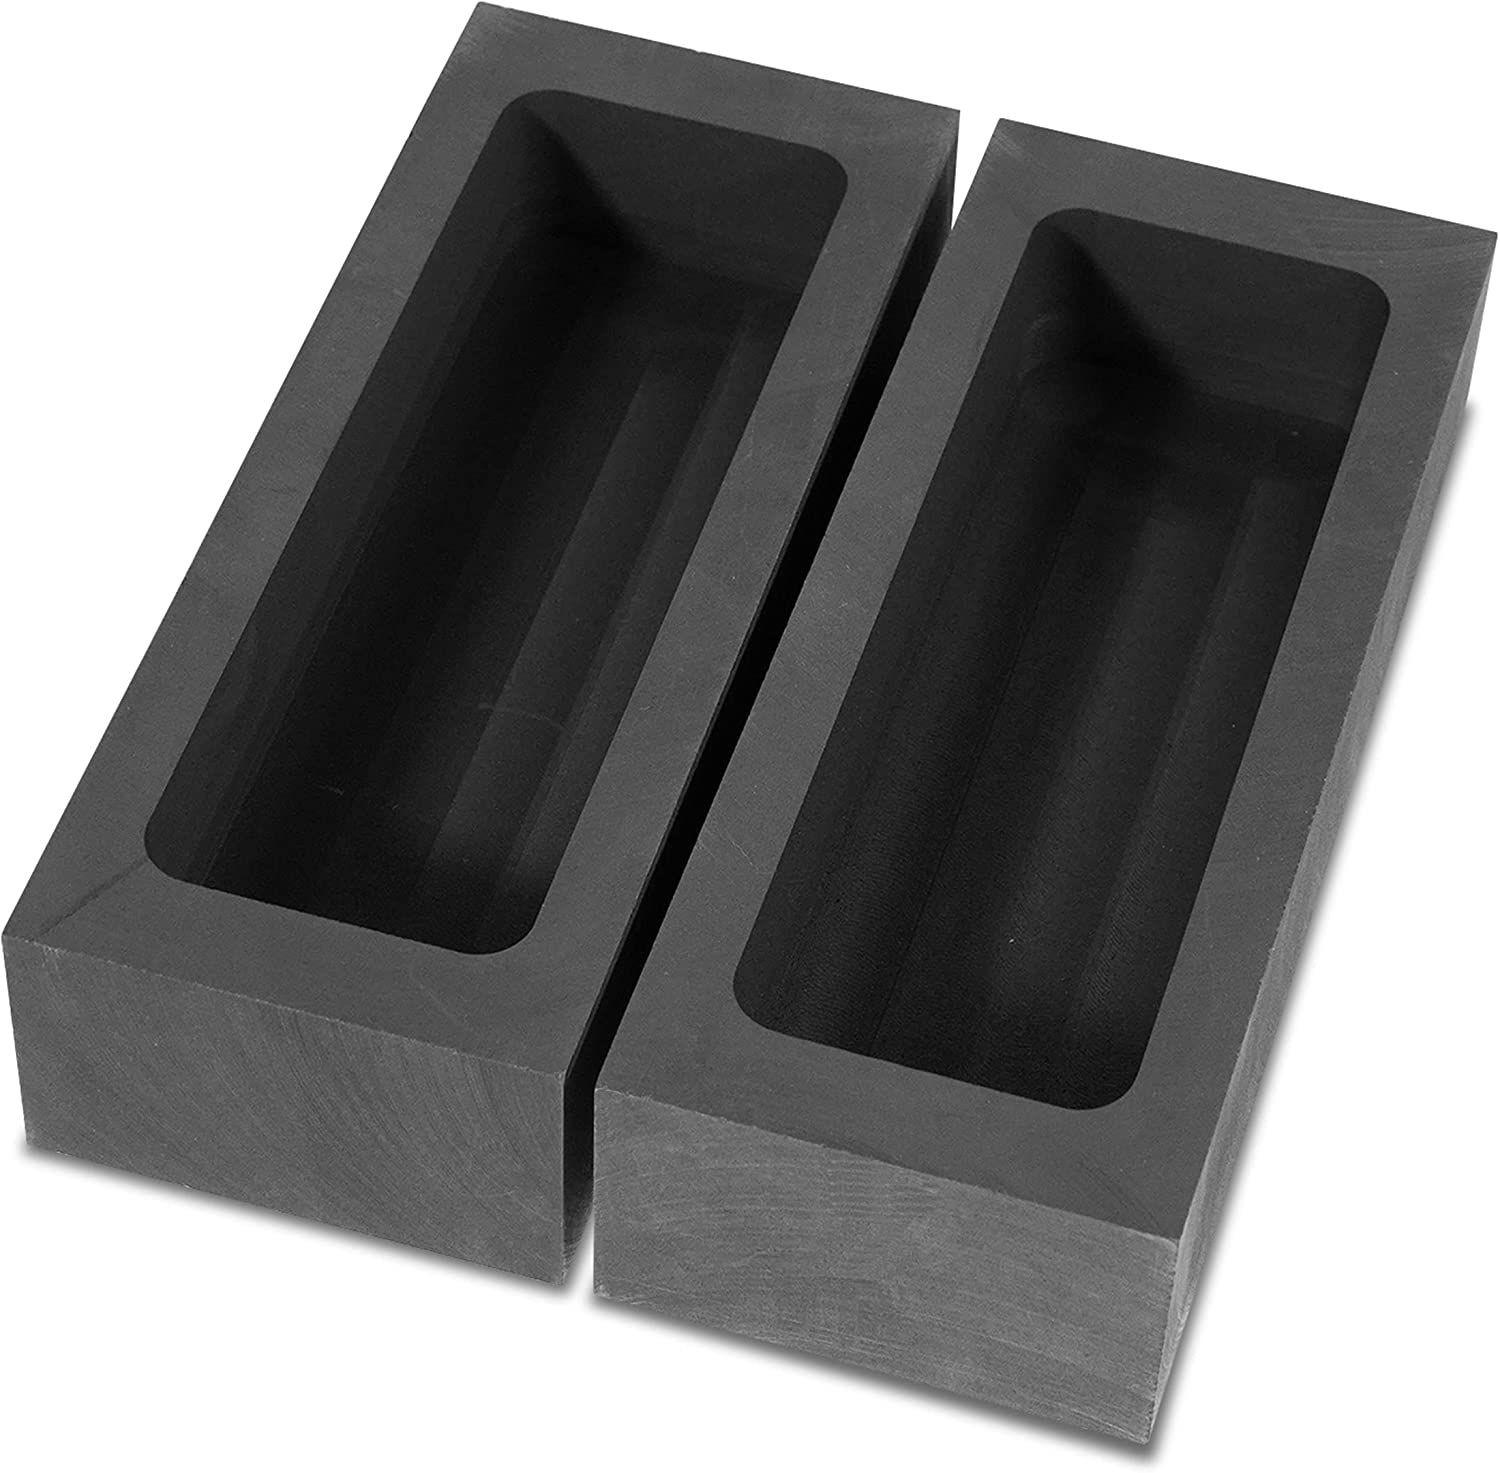 Graphite Ingot Mold 3 Pack - Metal Molds Casting Large Melting Mold For  Precious Metals And Refining - 1Kg Capacity - AliExpress